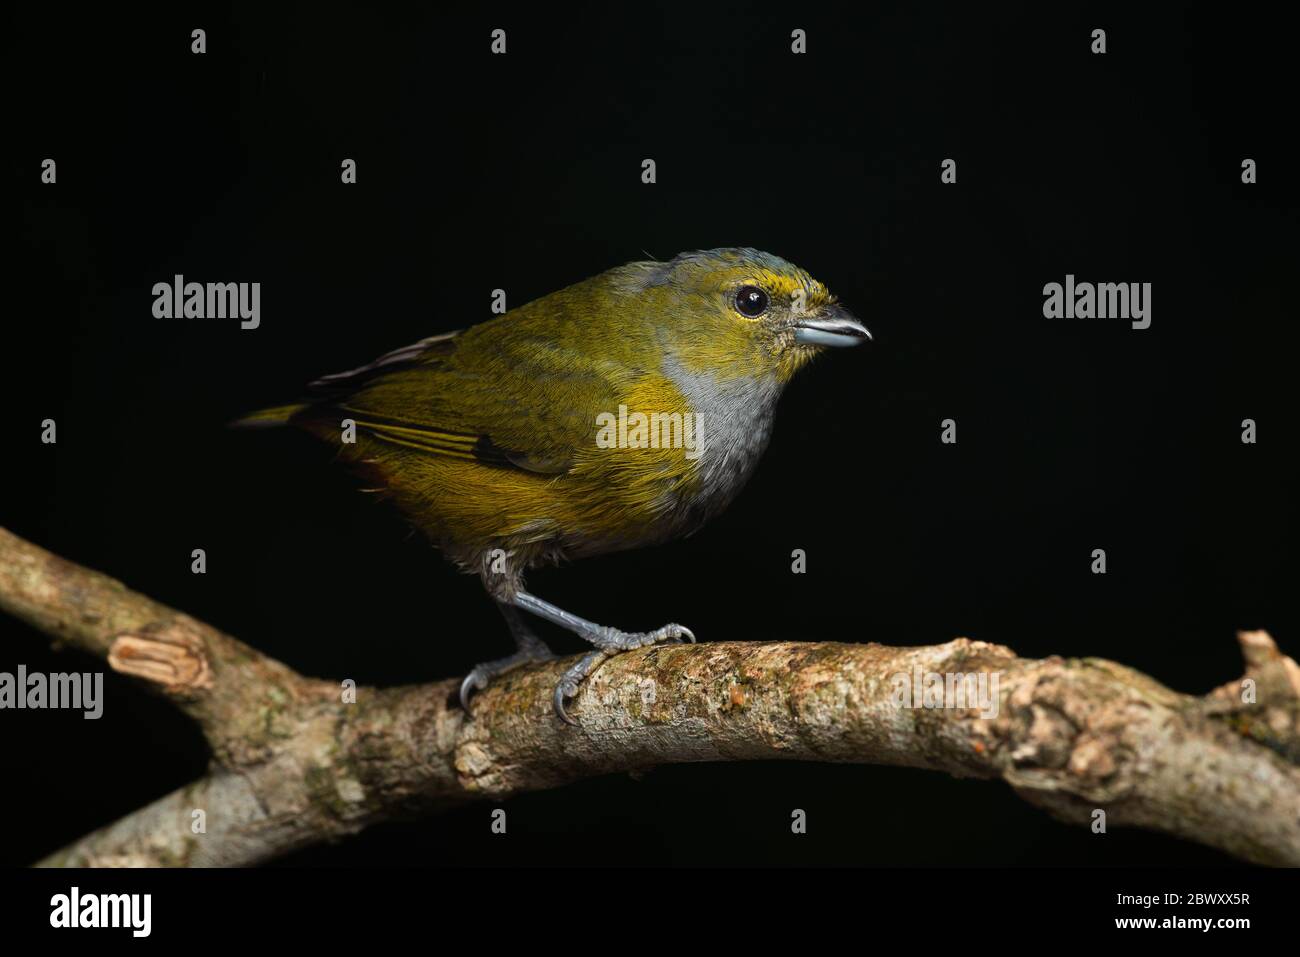 A female Chestnut-bellied Euphonia (Euphonia pectoralis) from the Atlantic Rainforest of SE Brazil Stock Photo